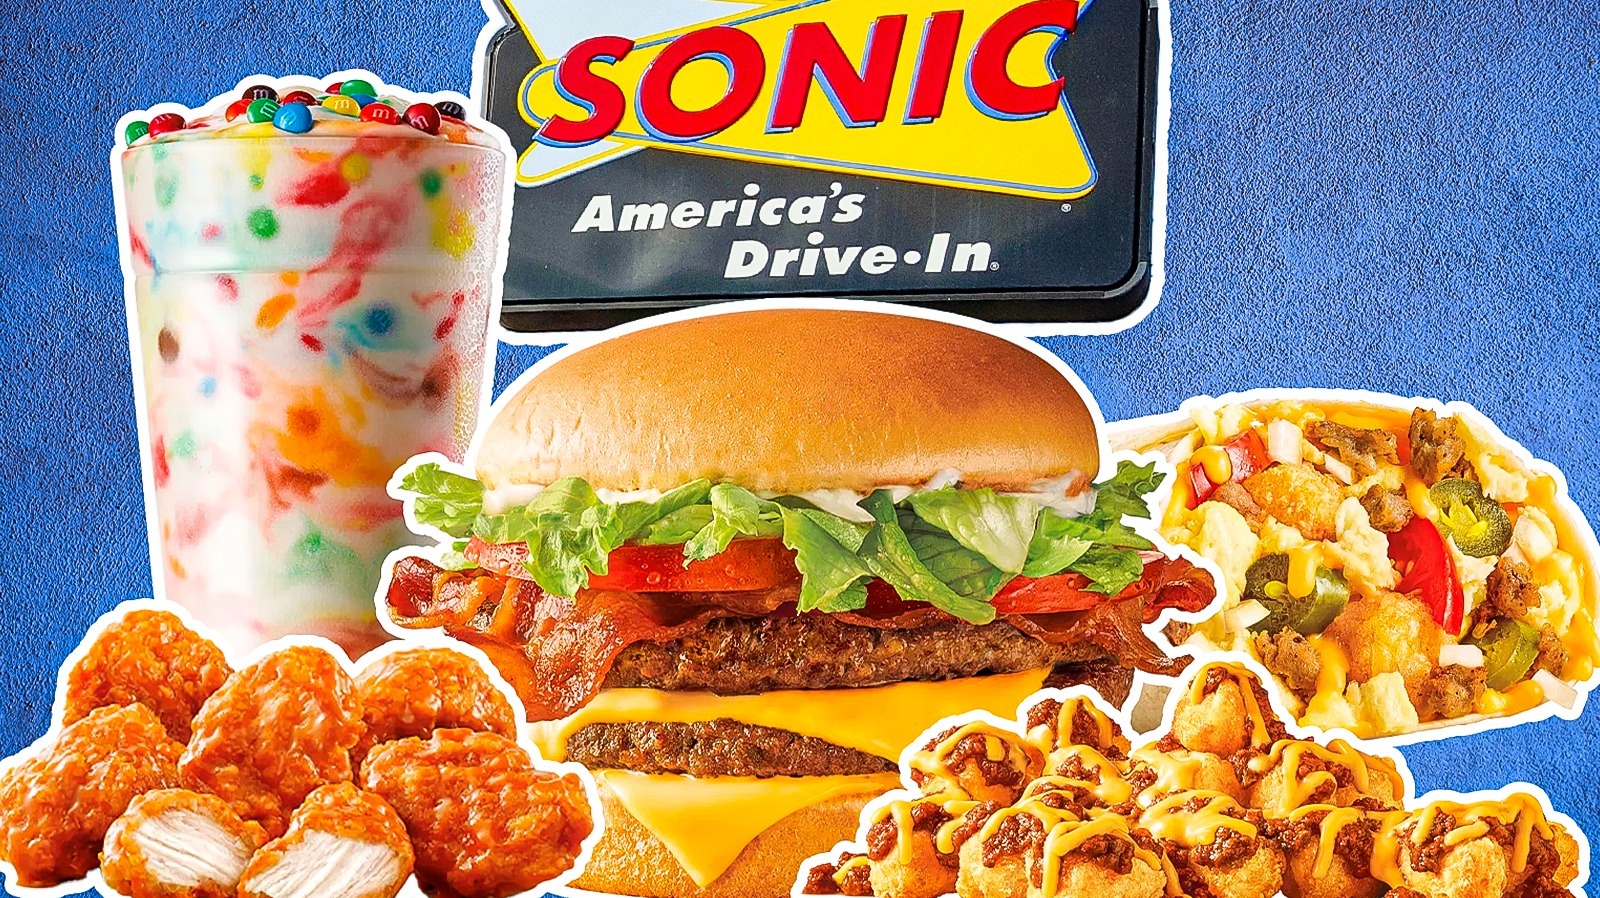 14 Things You Might Want To Avoid Ordering At Sonic